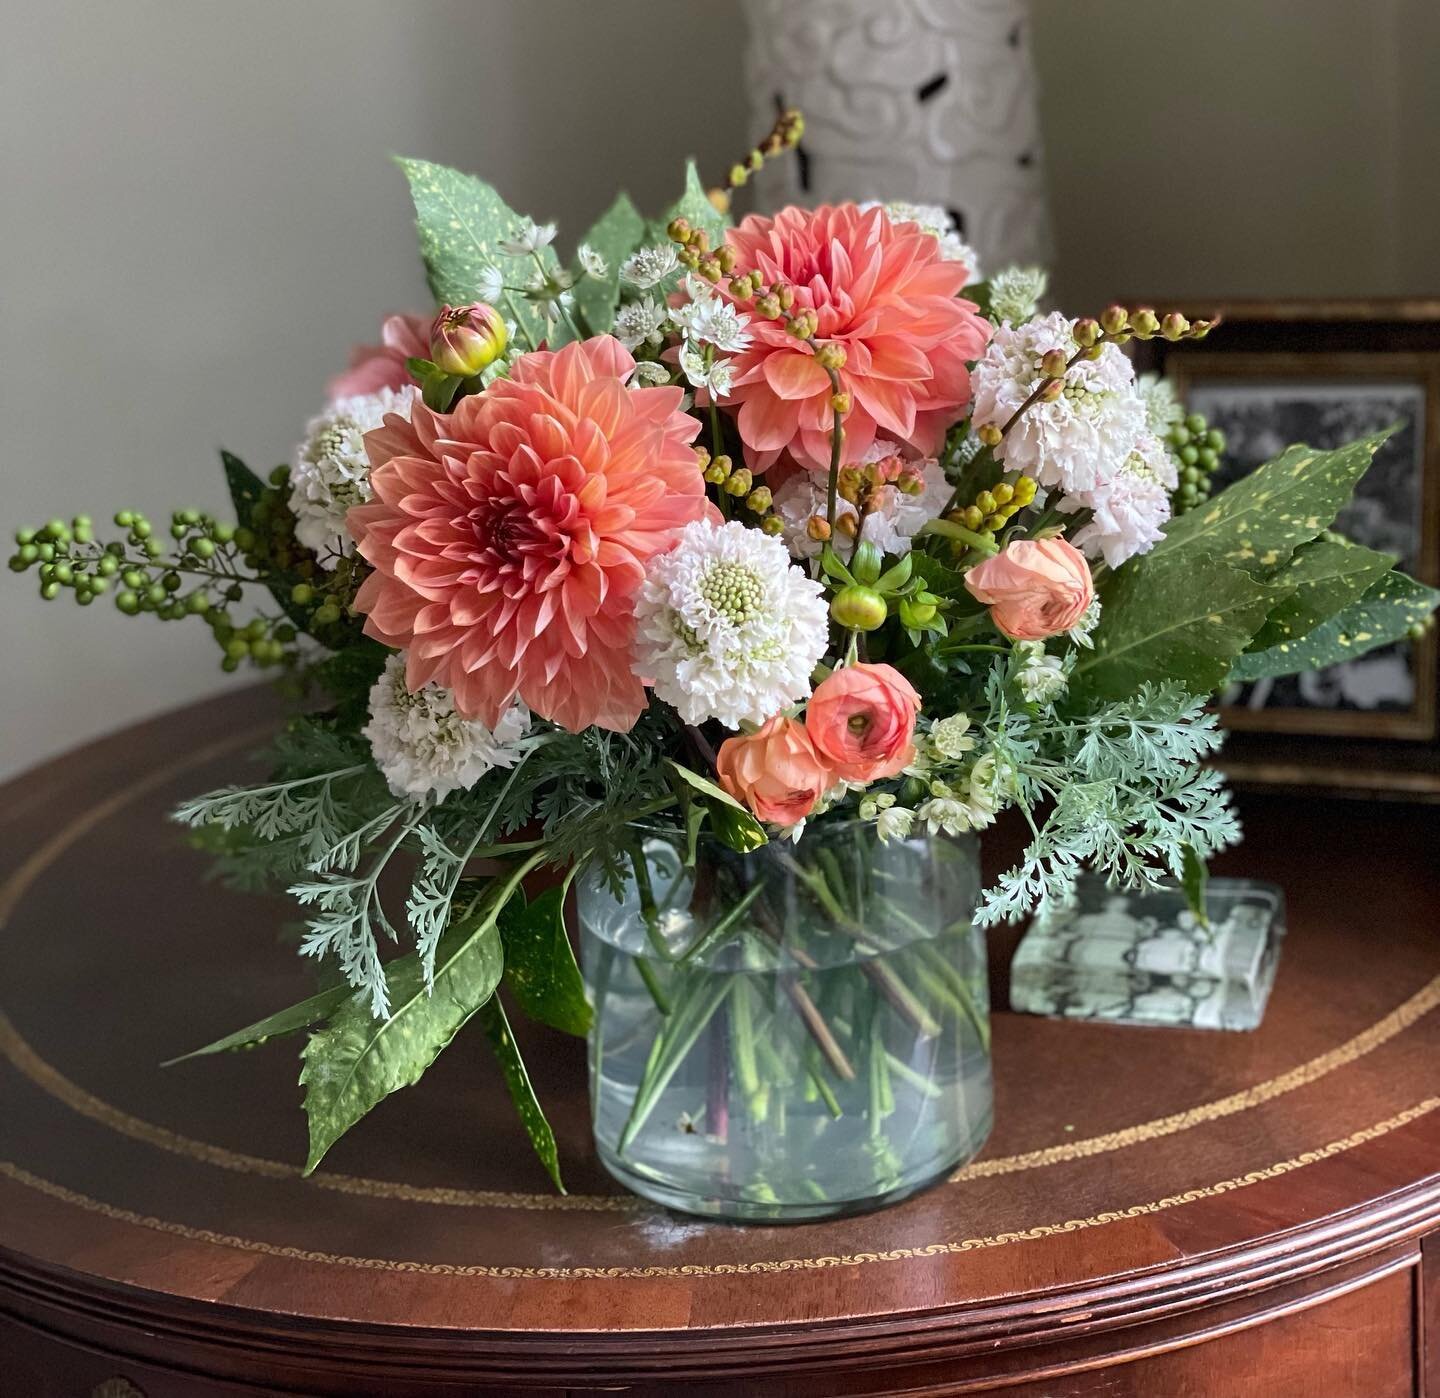 I just added a new adult evening class to the website! Sign up now for The Art of Floral Design with Carter Dawson, September 14, 6:30-8:30 PM. 🔗 in bio. 

#nashvillefloralworkshop